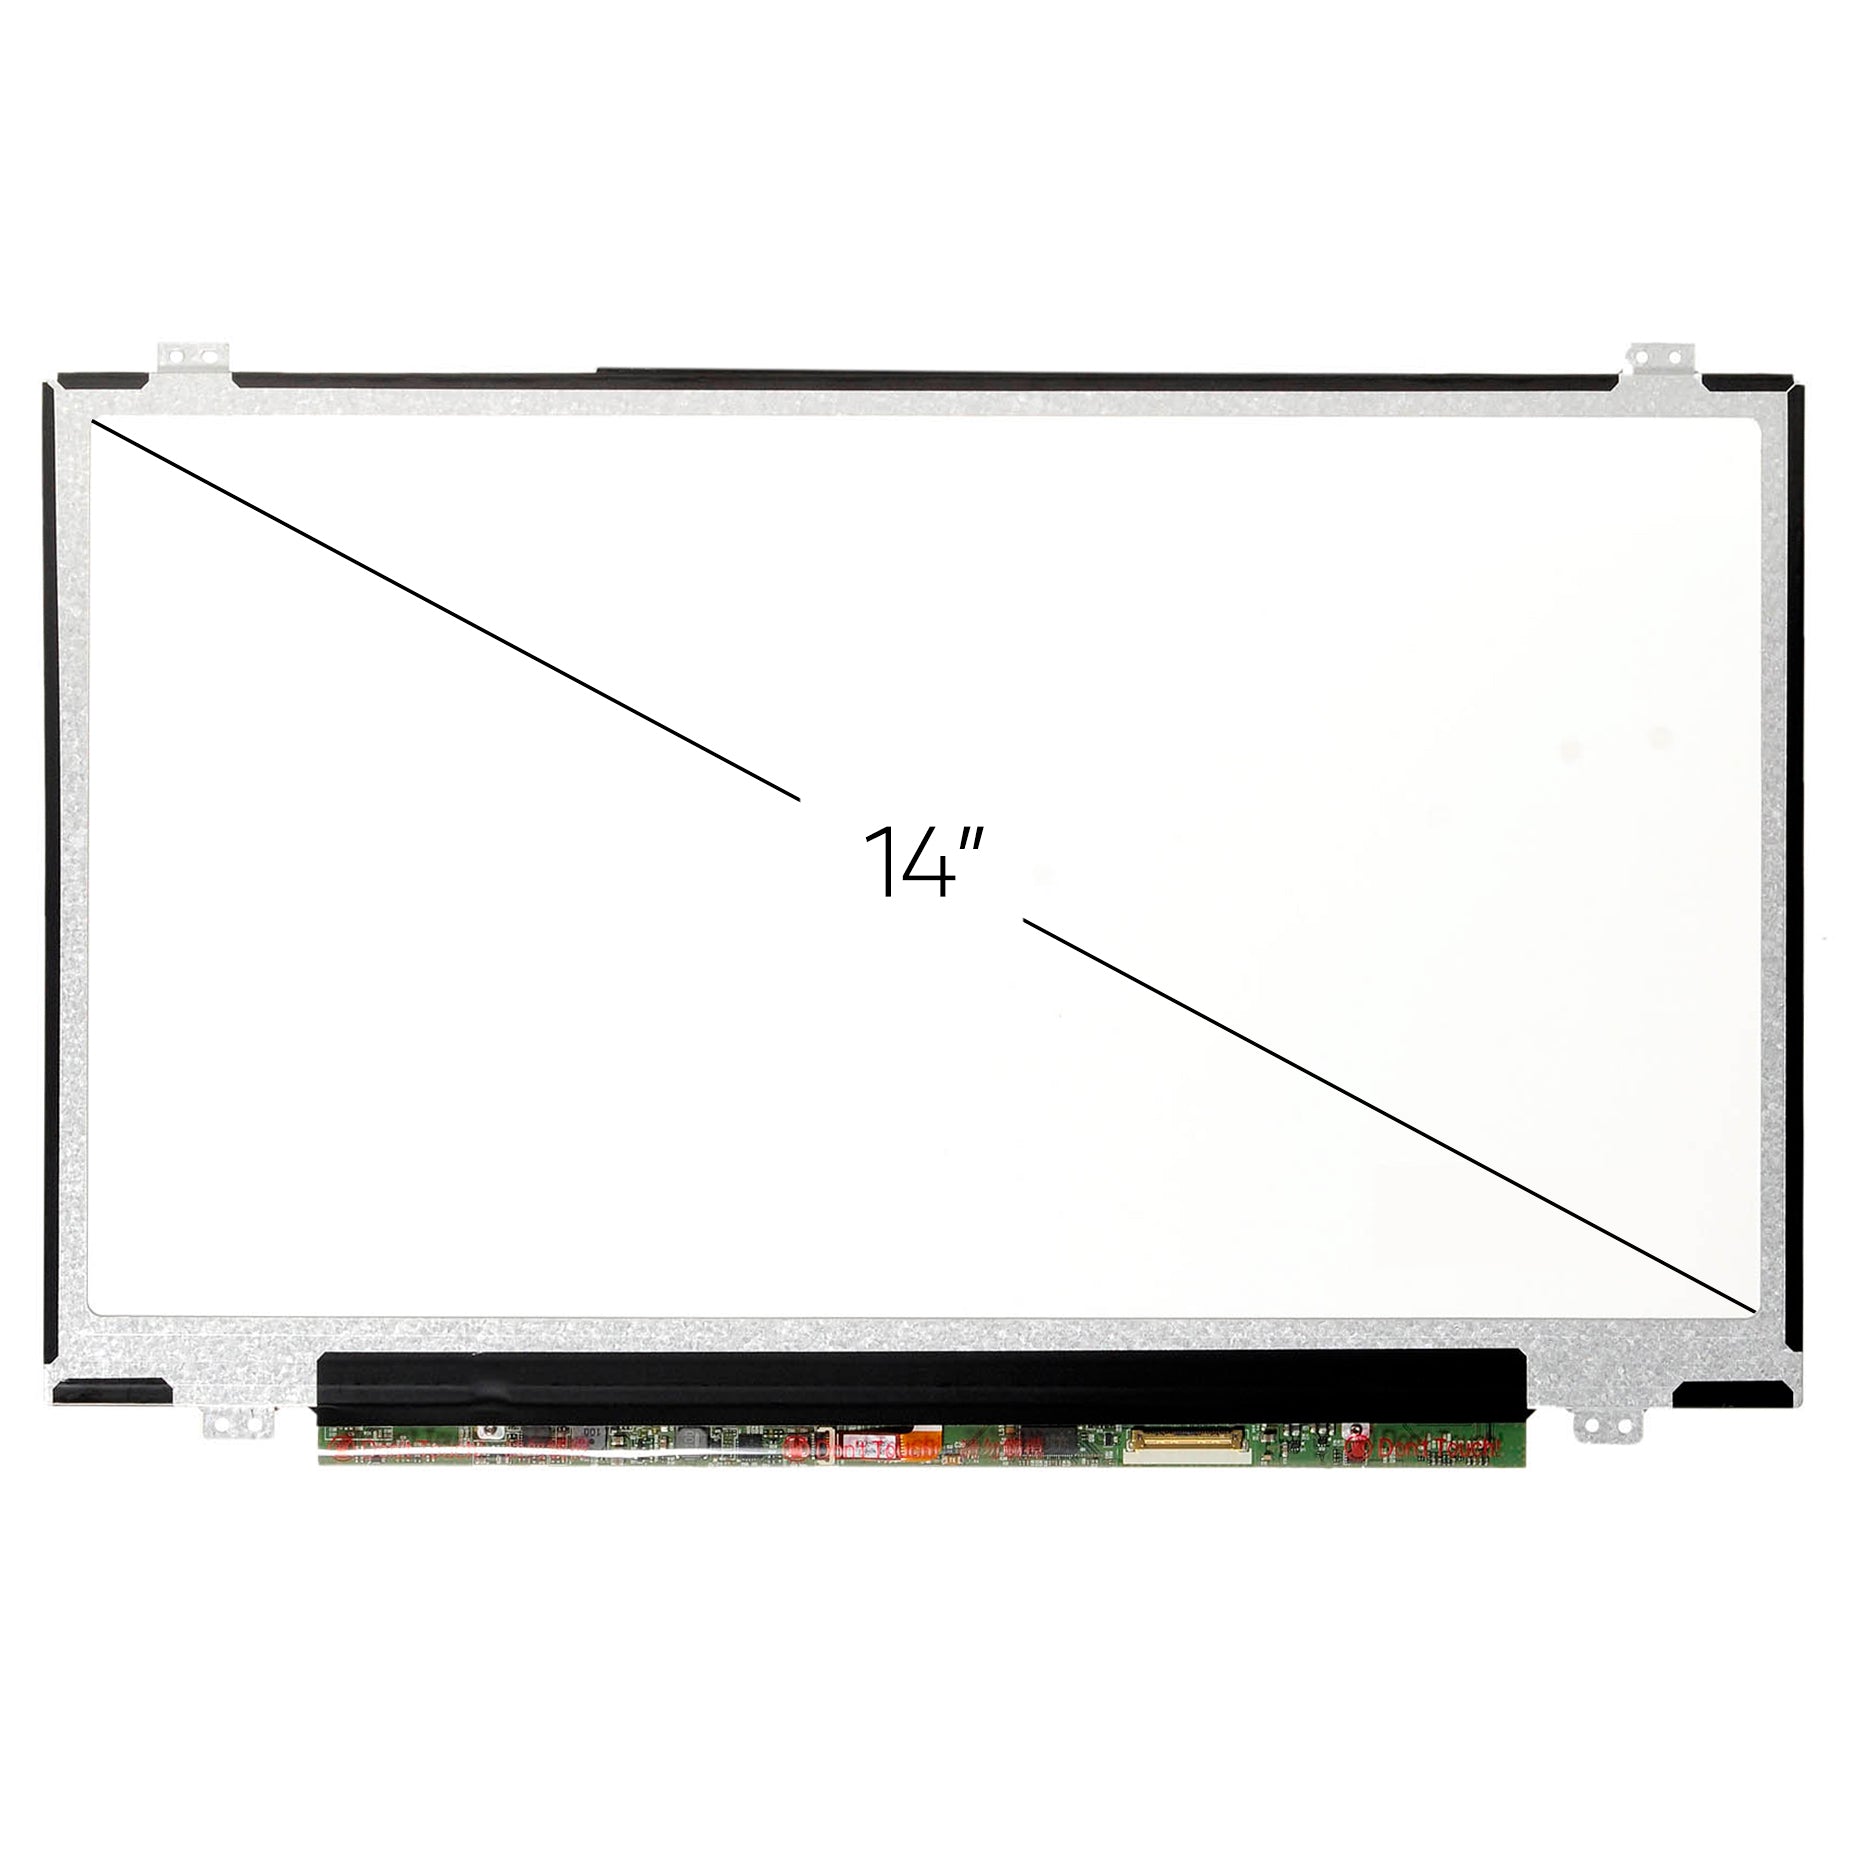 Screen Replacement for Lenovo Y40-80 80FA FHD 1920x1080 IPS Matte LCD LED Display